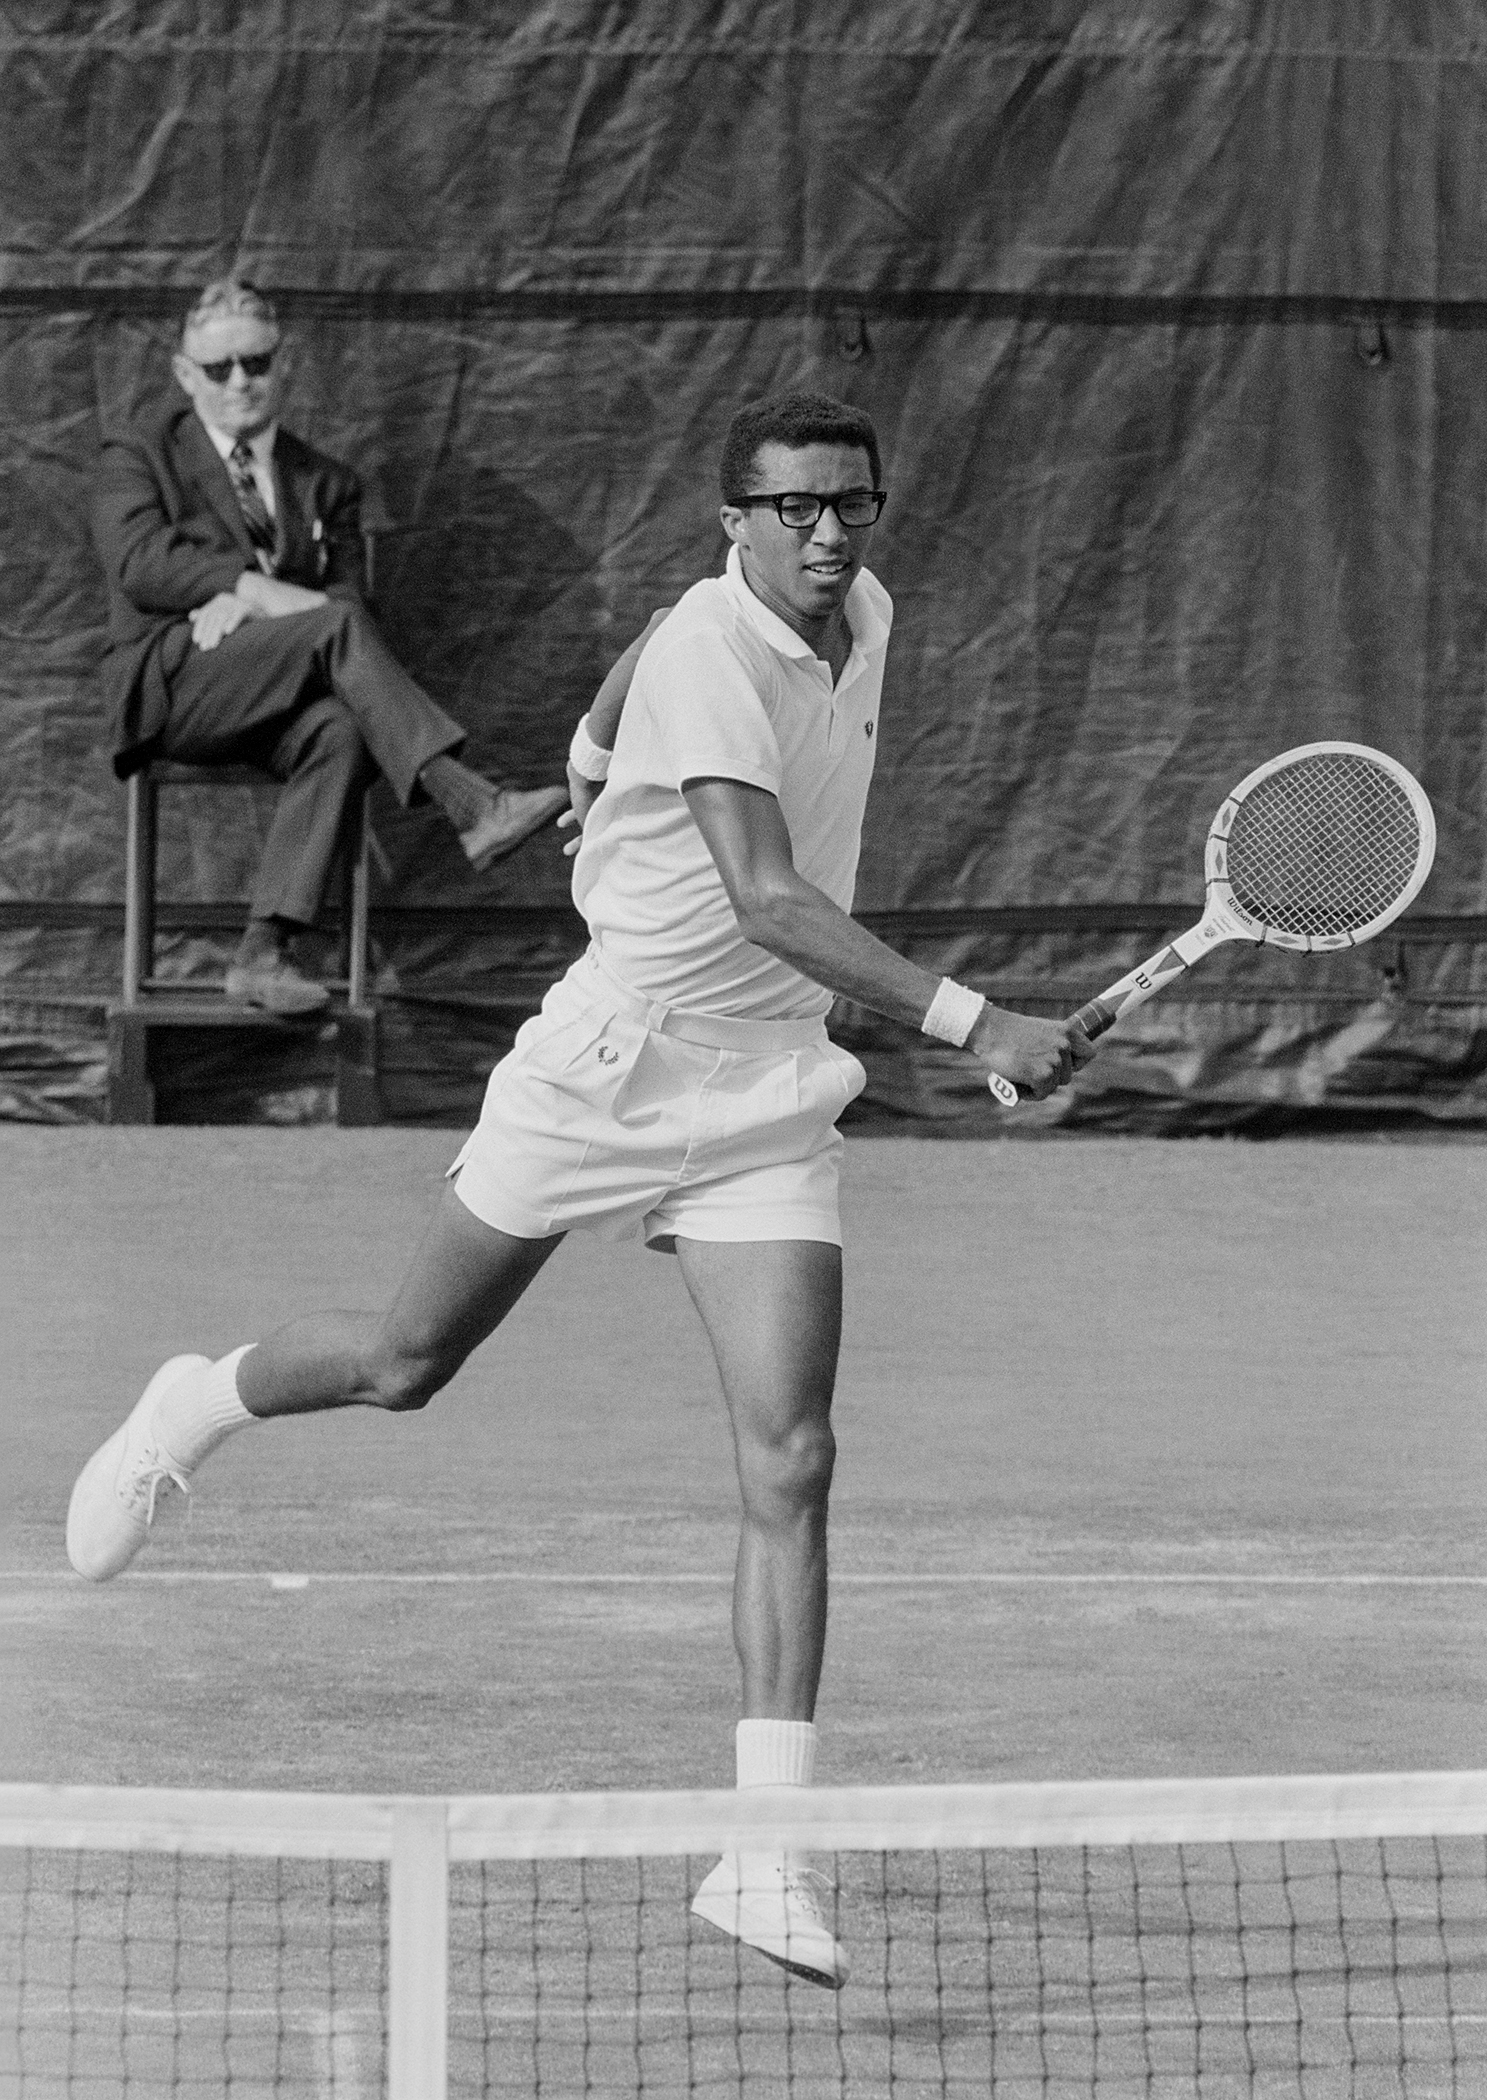 American tennis player Arthur Ashe (1943 - 1993) playing in the US Open final against Tom Okker of the Netherlands. West Side Tennis Club, Forest Hills, New York, September 9, 1968. Photographer John G. Zimmerman